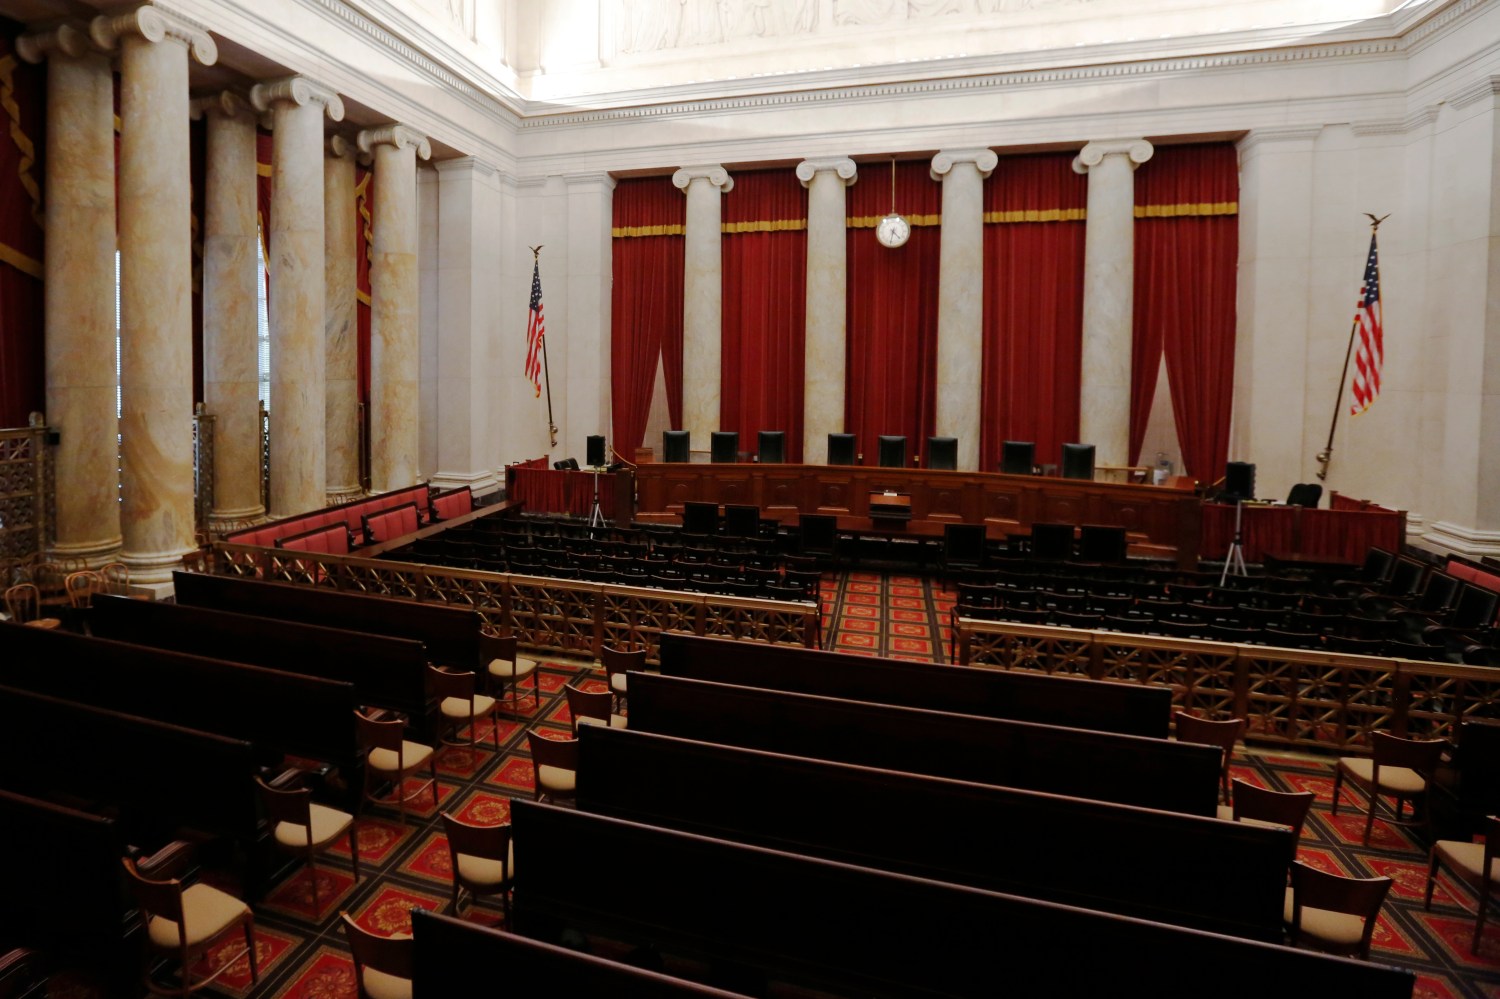 The courtroom of the U.S. Supreme Court is seen in Washington